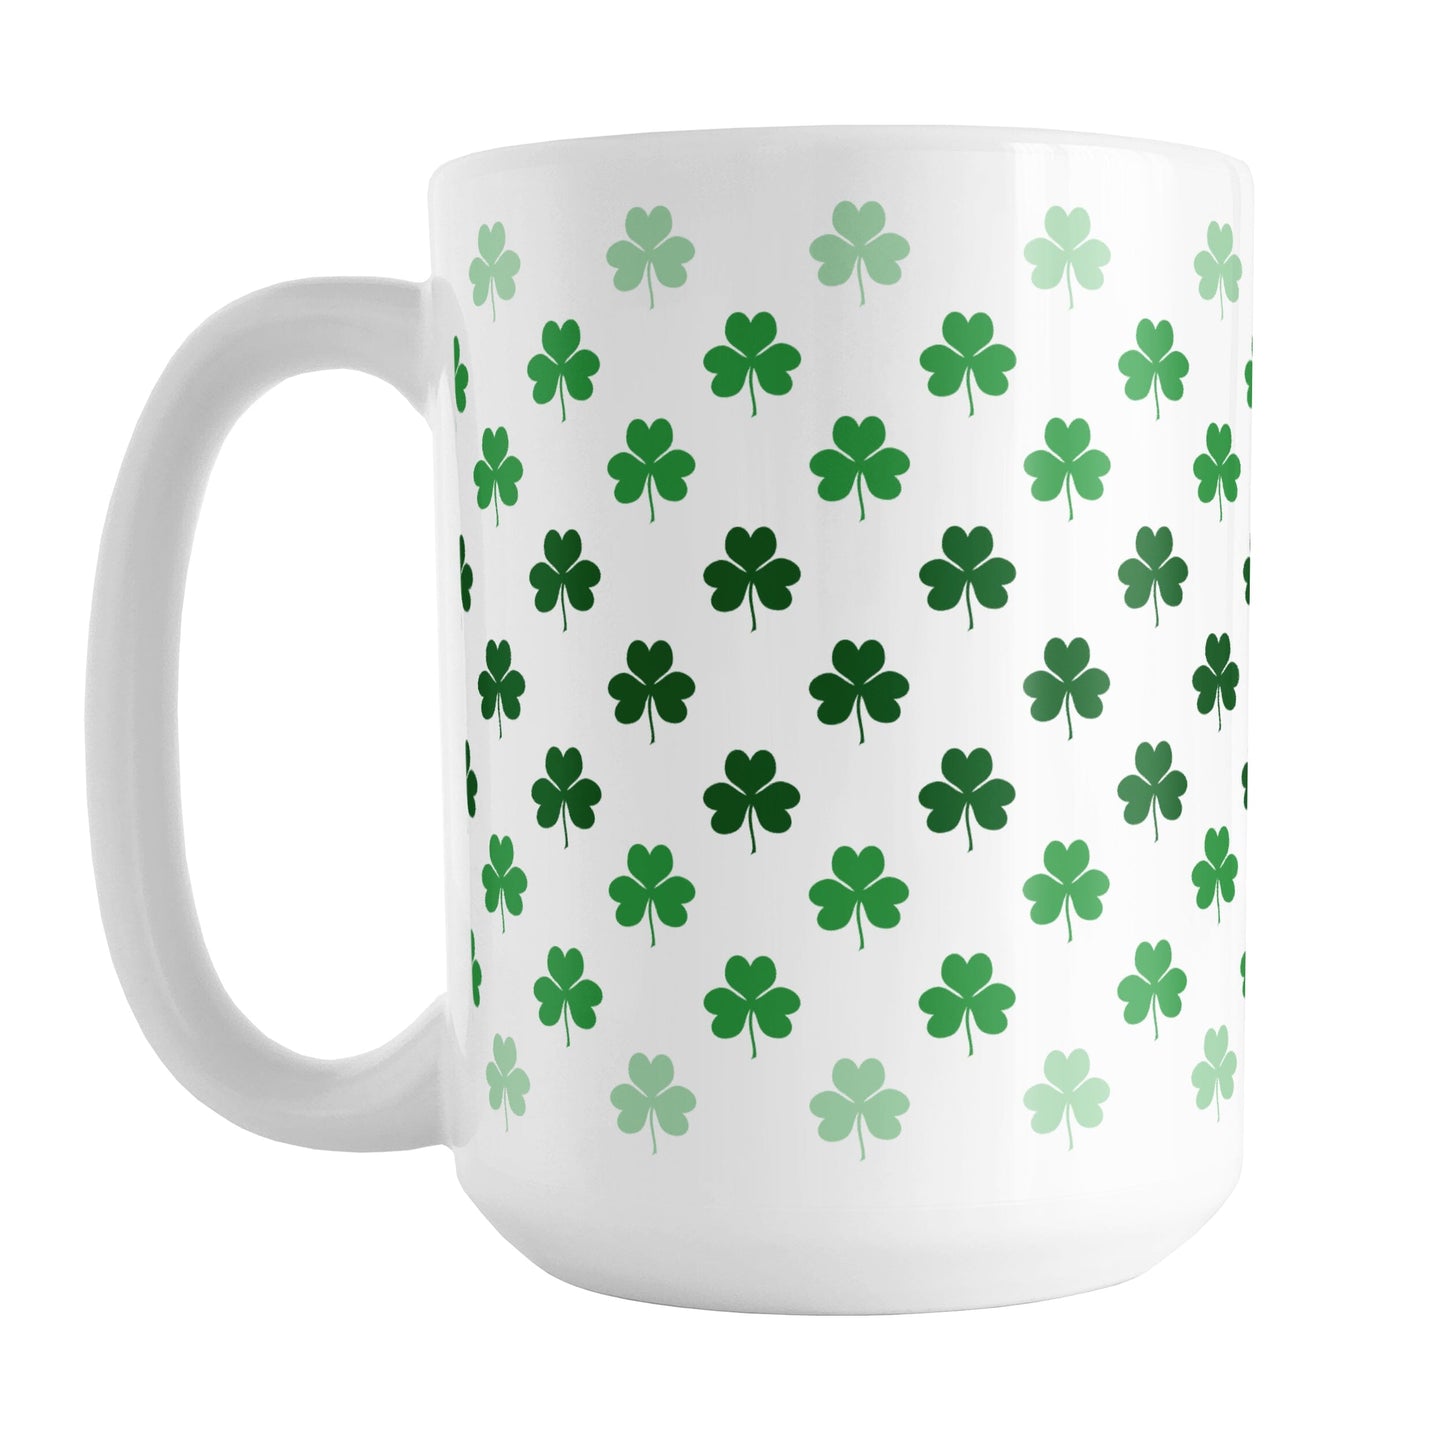 Shamrocks in Green Mug (15oz) at Amy's Coffee Mugs. A ceramic coffee mug designed with shamrocks (or clovers) in different shades of green, with the darker green color across the middle and the lighter green along the top and bottom, in a pattern that wraps around the mug to the handle.